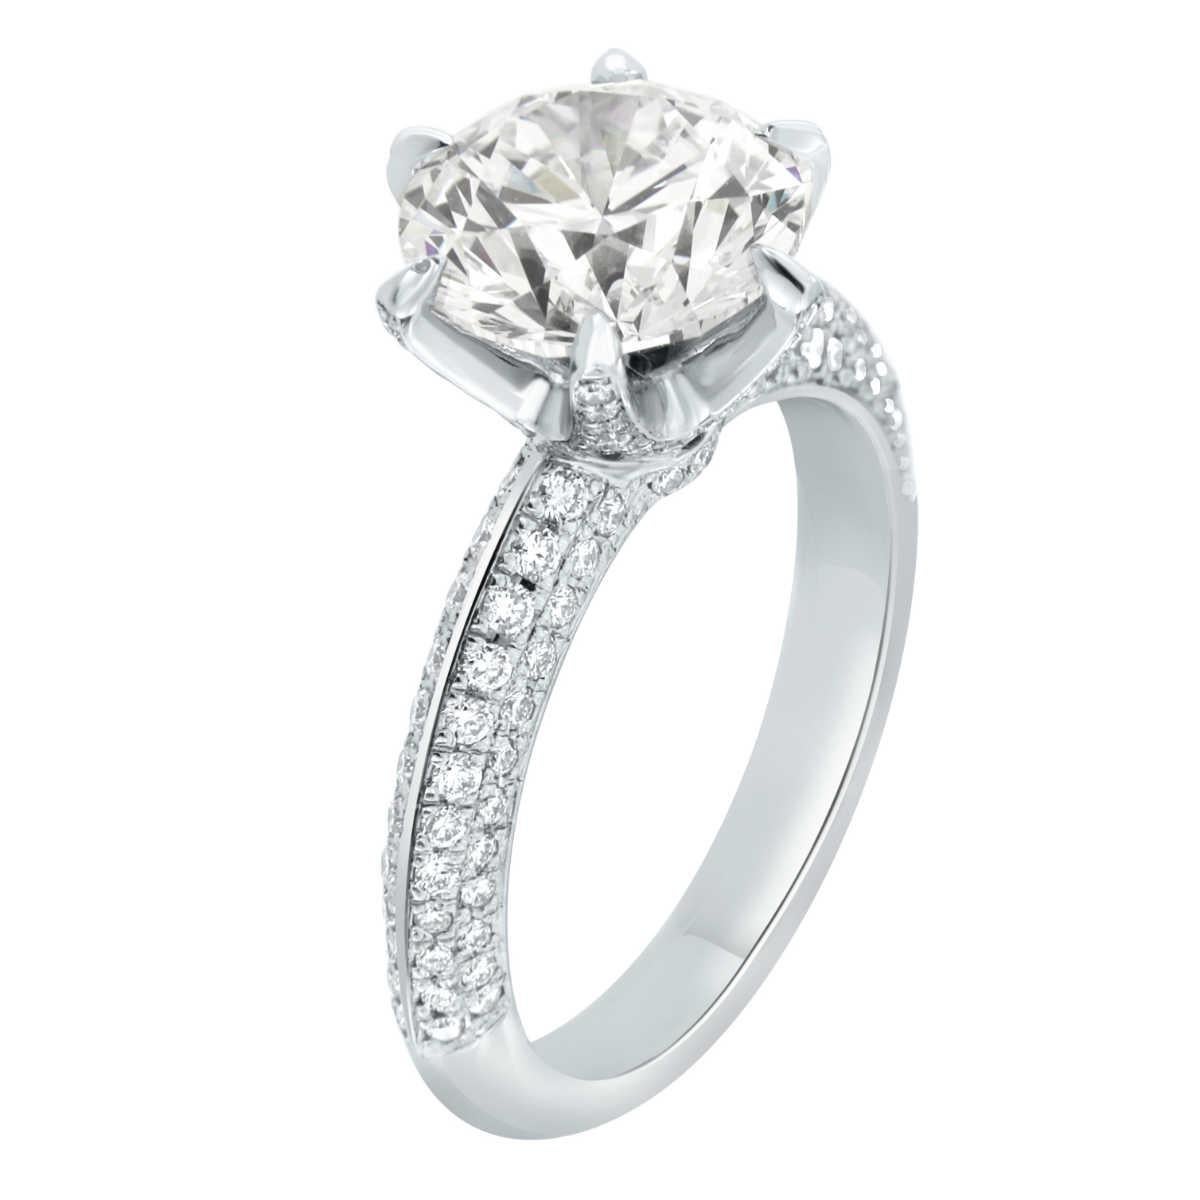 This stunning hand-crafted ring features an ideal cut GIA certified 3.39 carat round diamond D color VVS1 in clarity with six (6) Claw prongs set on a shaped edge diamond band. Each one of the six prongs features a hidden diamond micro prong set.